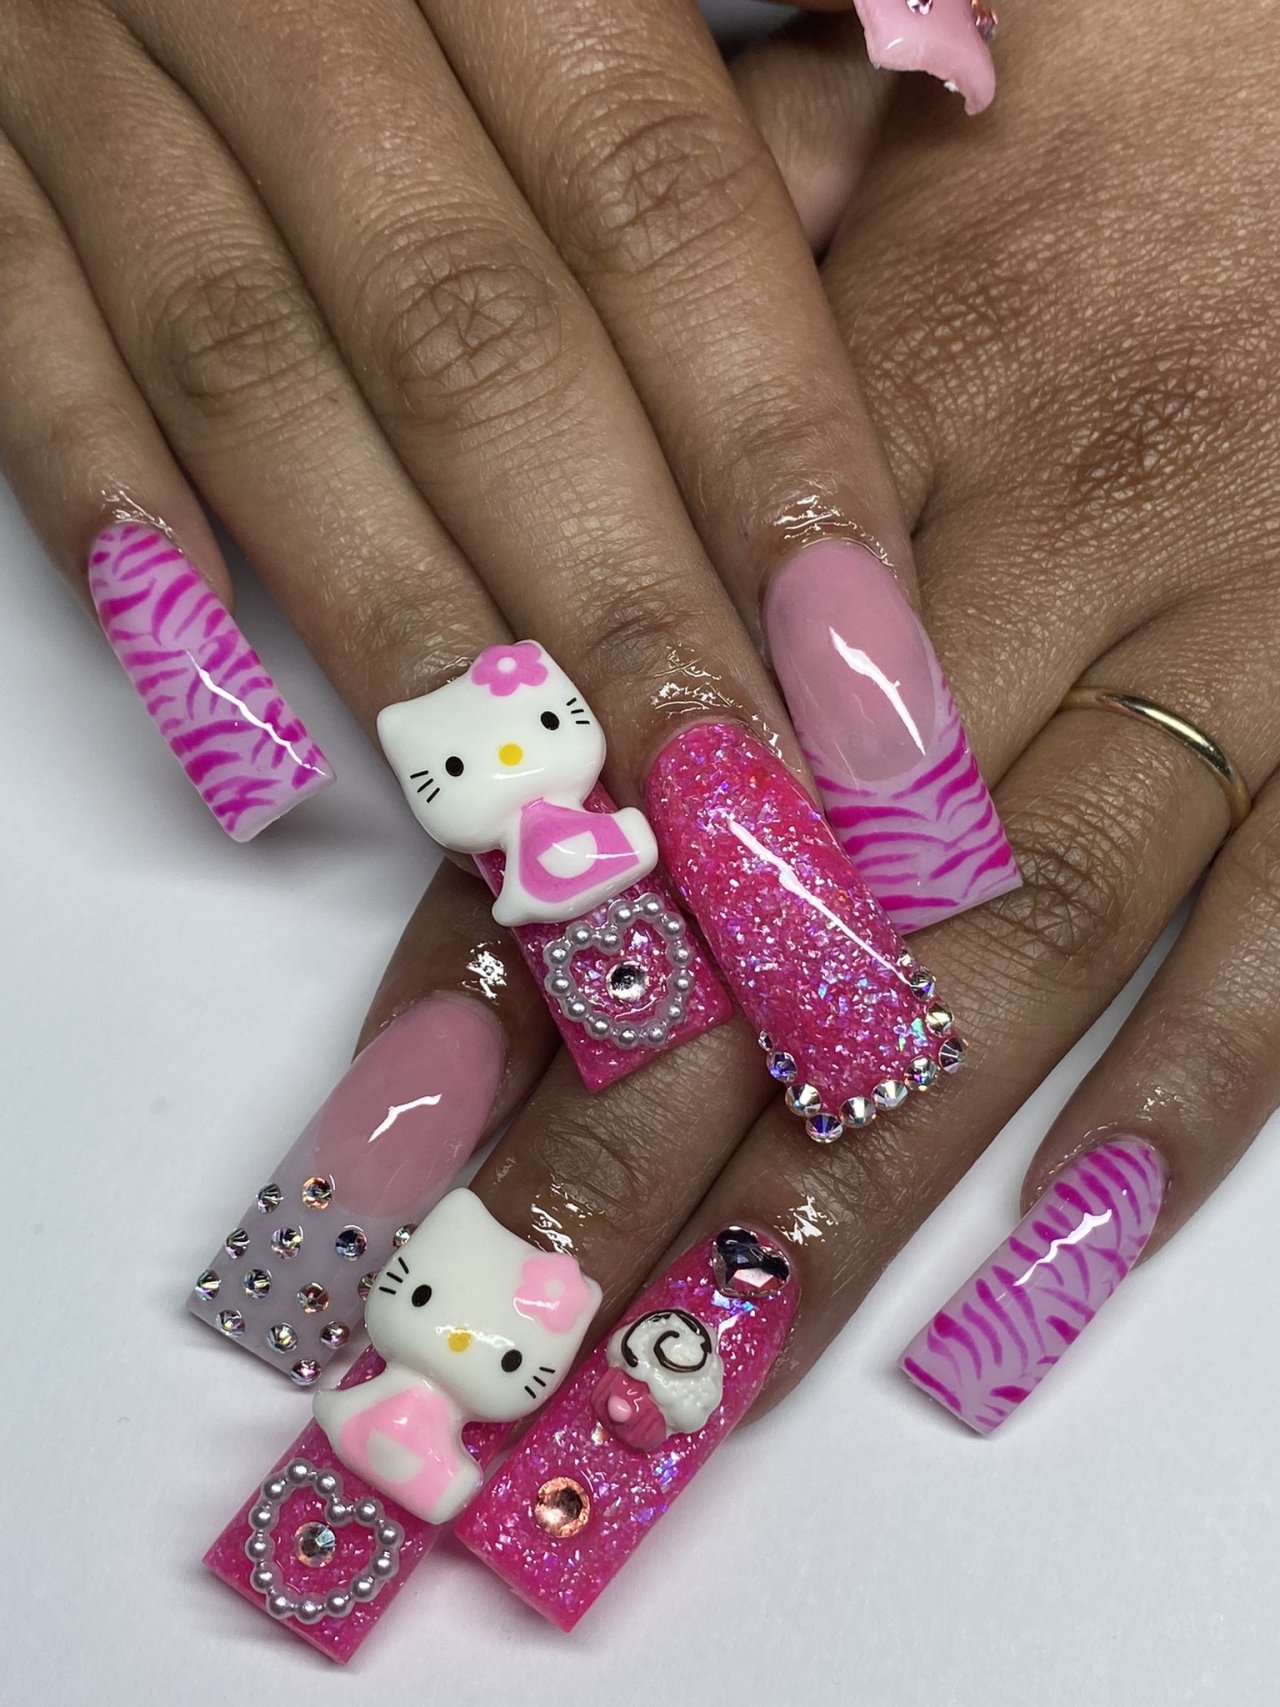 PINK HELLO KITTY NAILS 💖, HOW TO BLING FRENCH